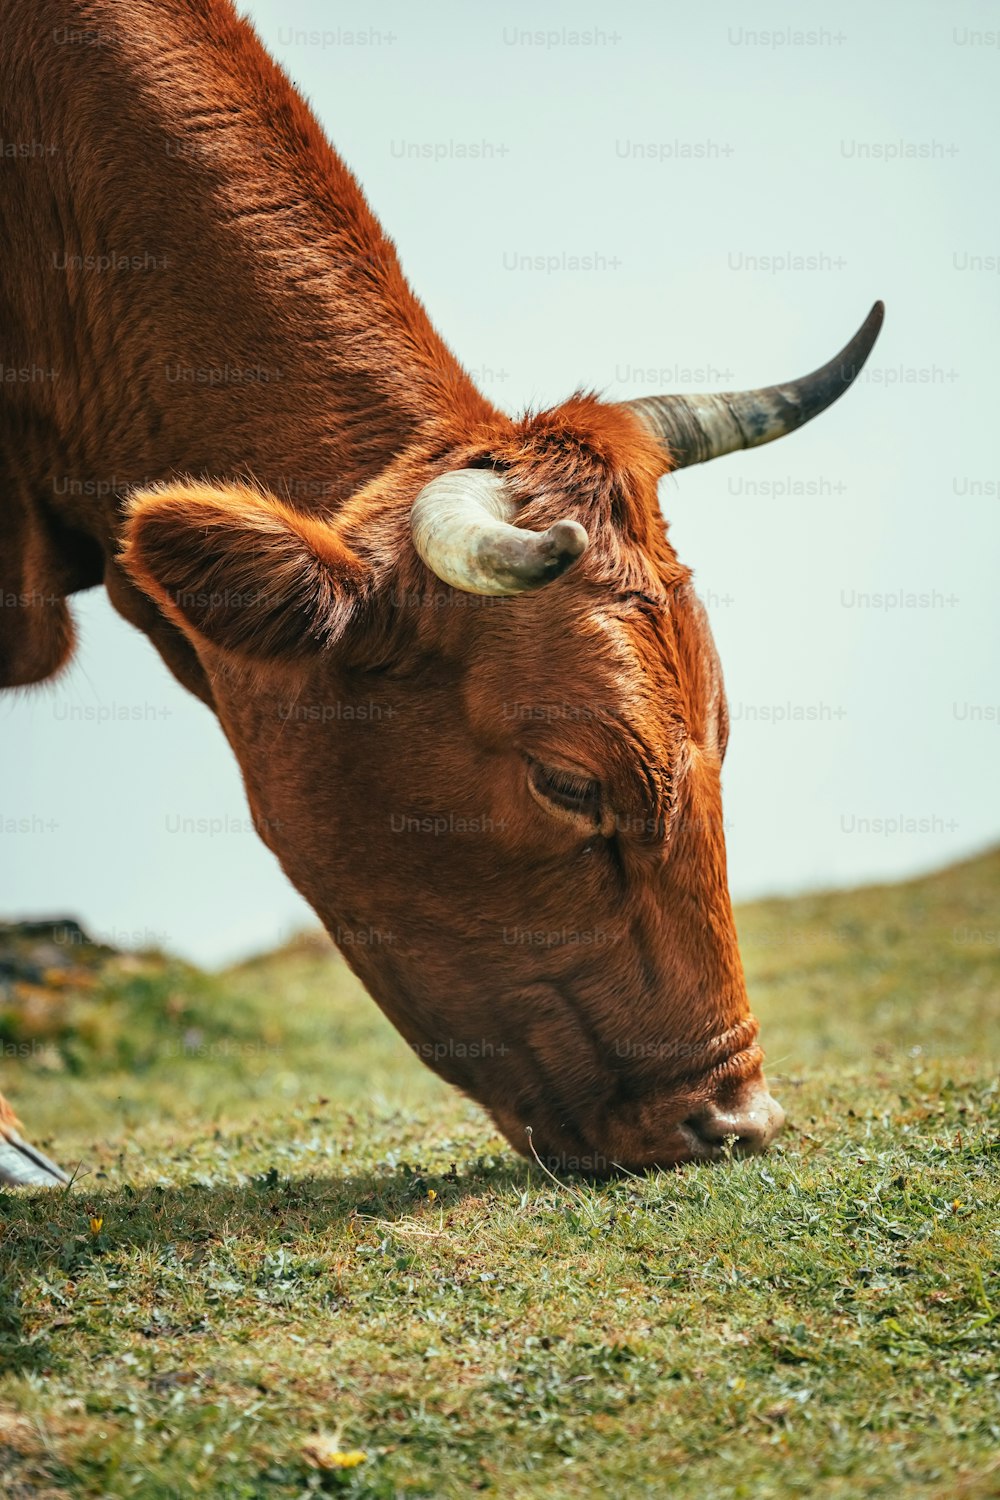 a close up of a cow grazing on grass